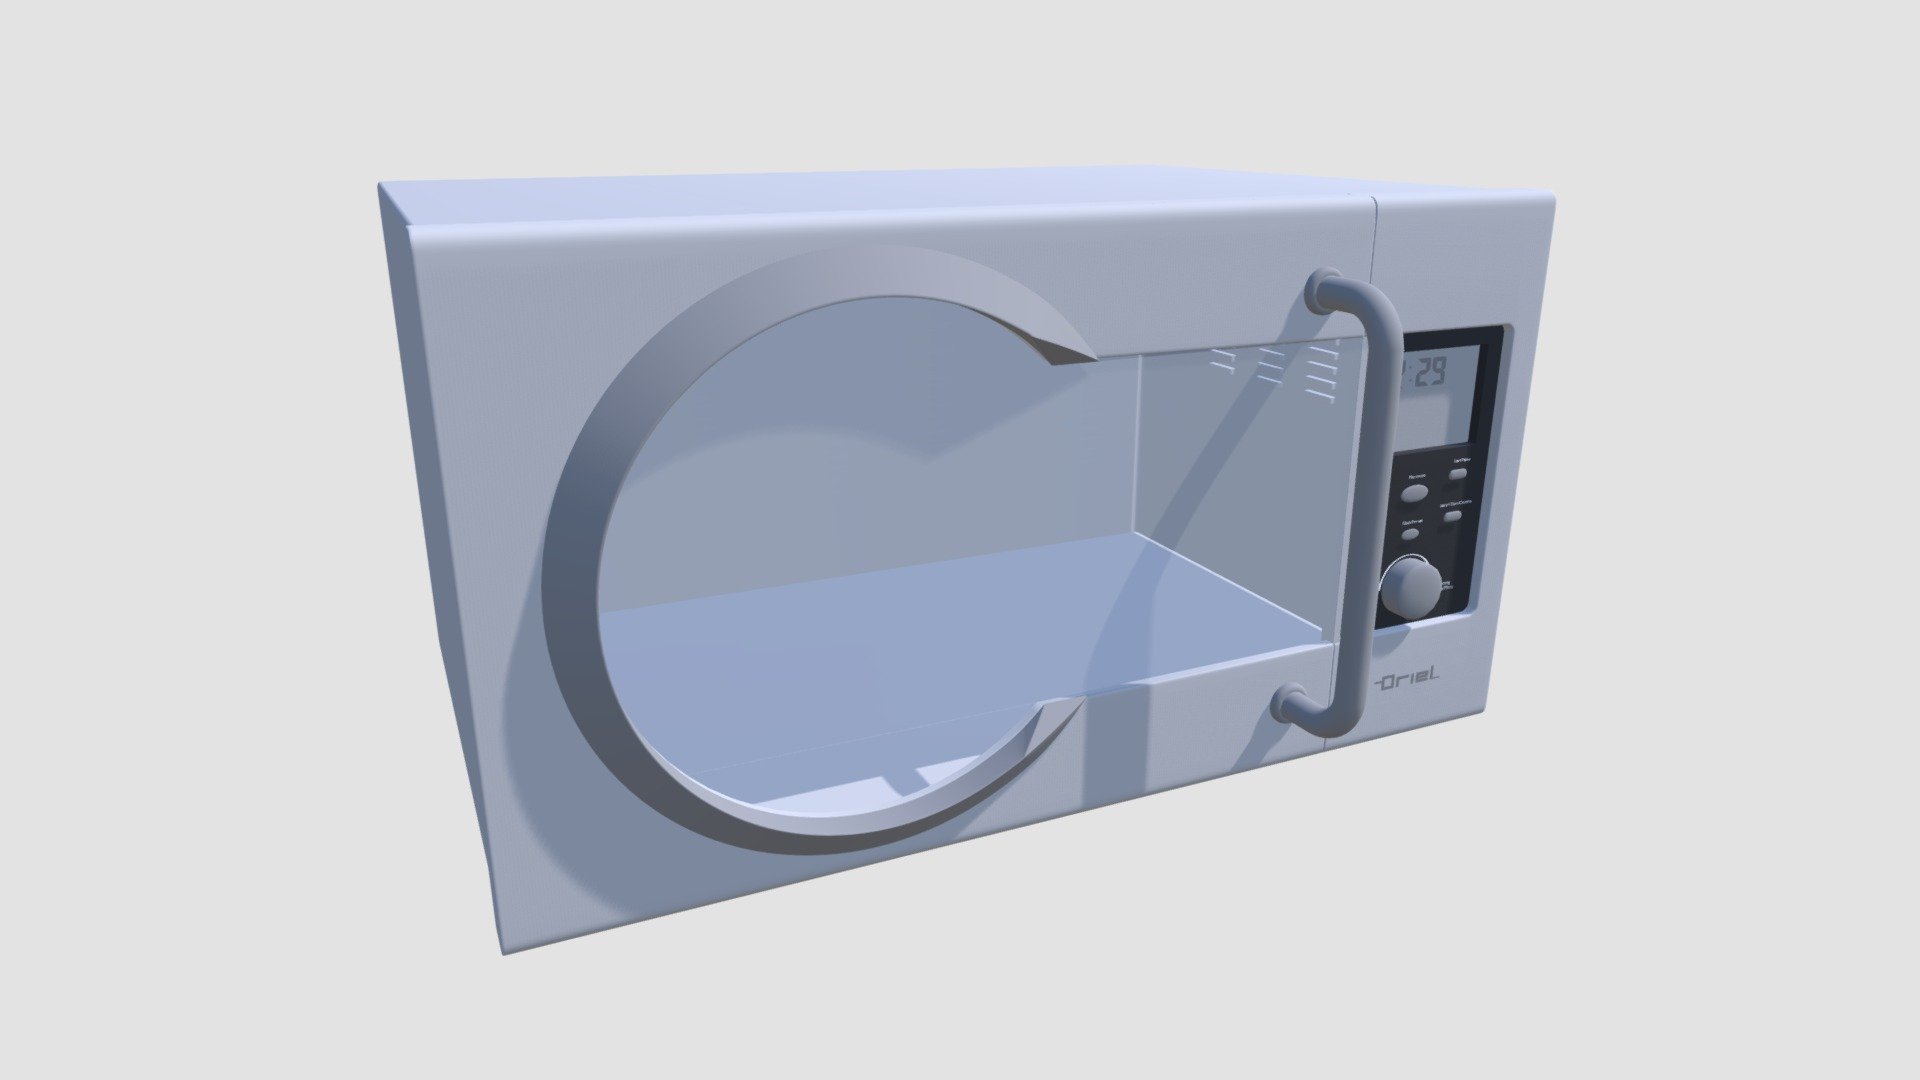 Highly detailed 3d model of microwave with all textures, shaders and materials. It is ready to use, just put it into your scene 3d model